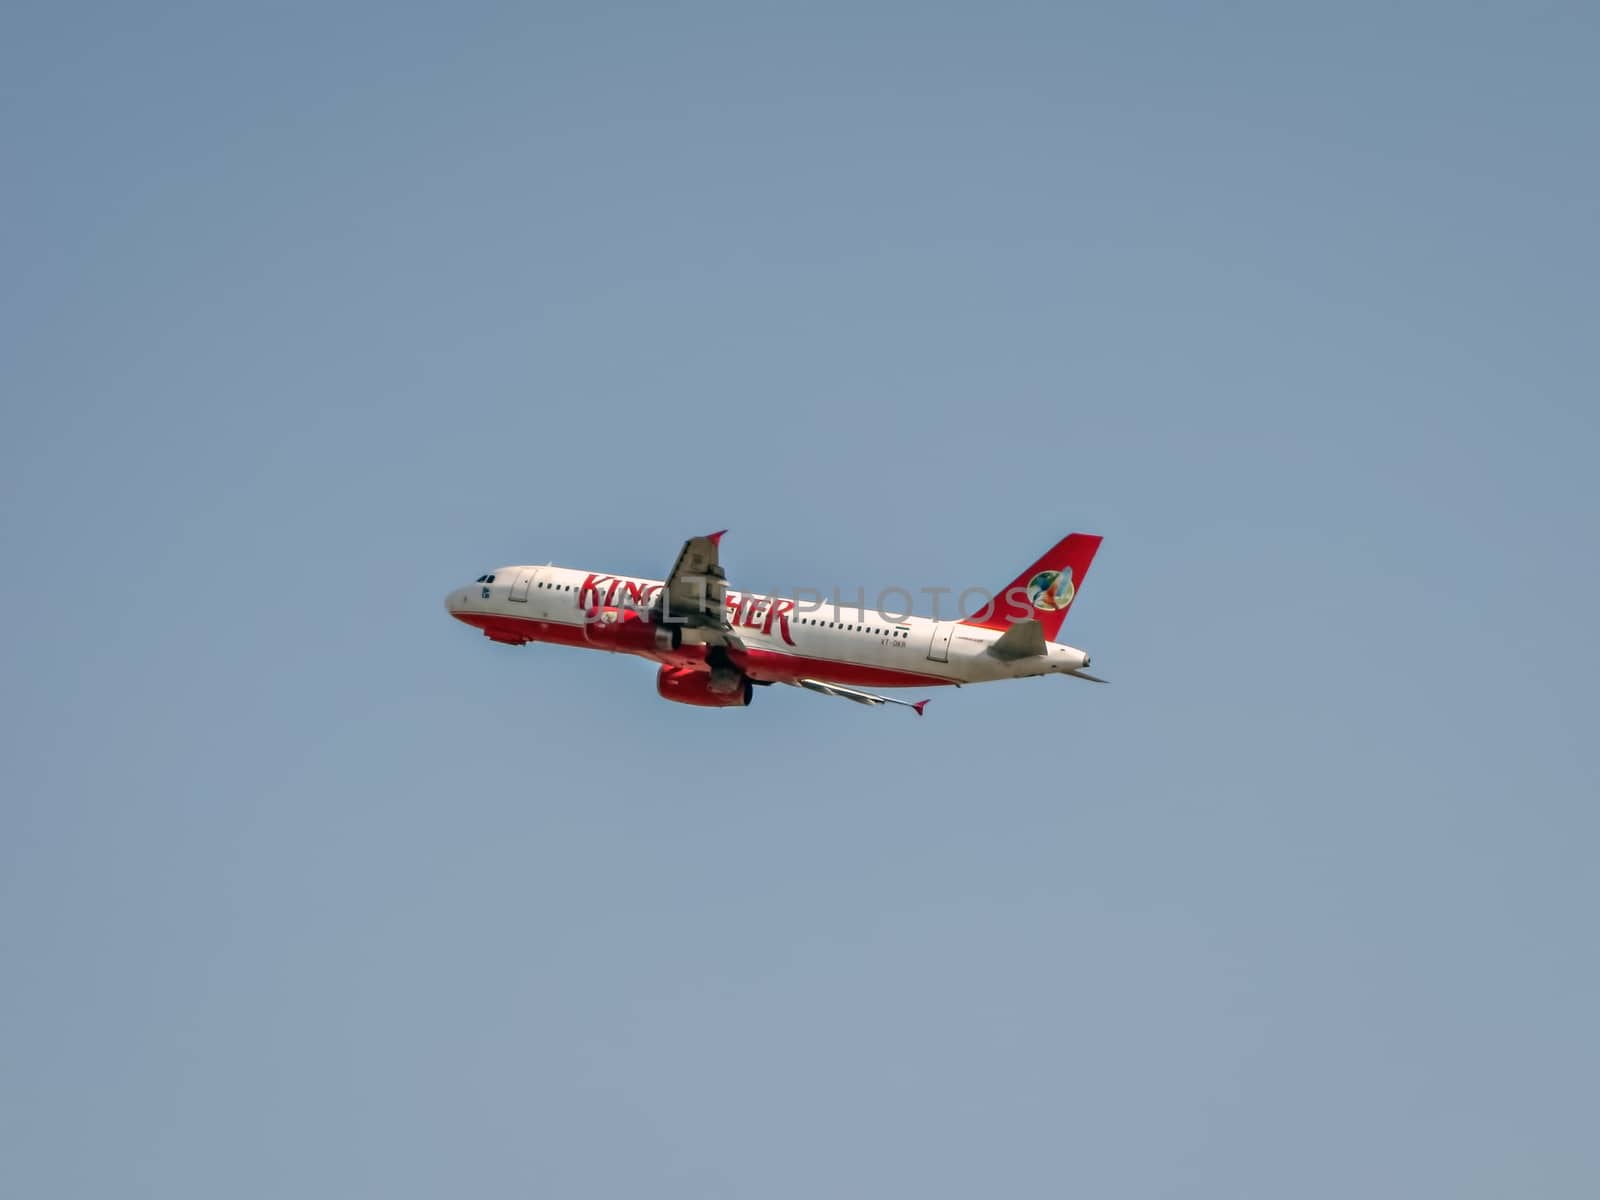 Leh, Jammu and Kashmir, India - June 26, 2011 : Kingfisher Airlines airbus A-320 # VT-DKR takes off from LehIXL. by lalam